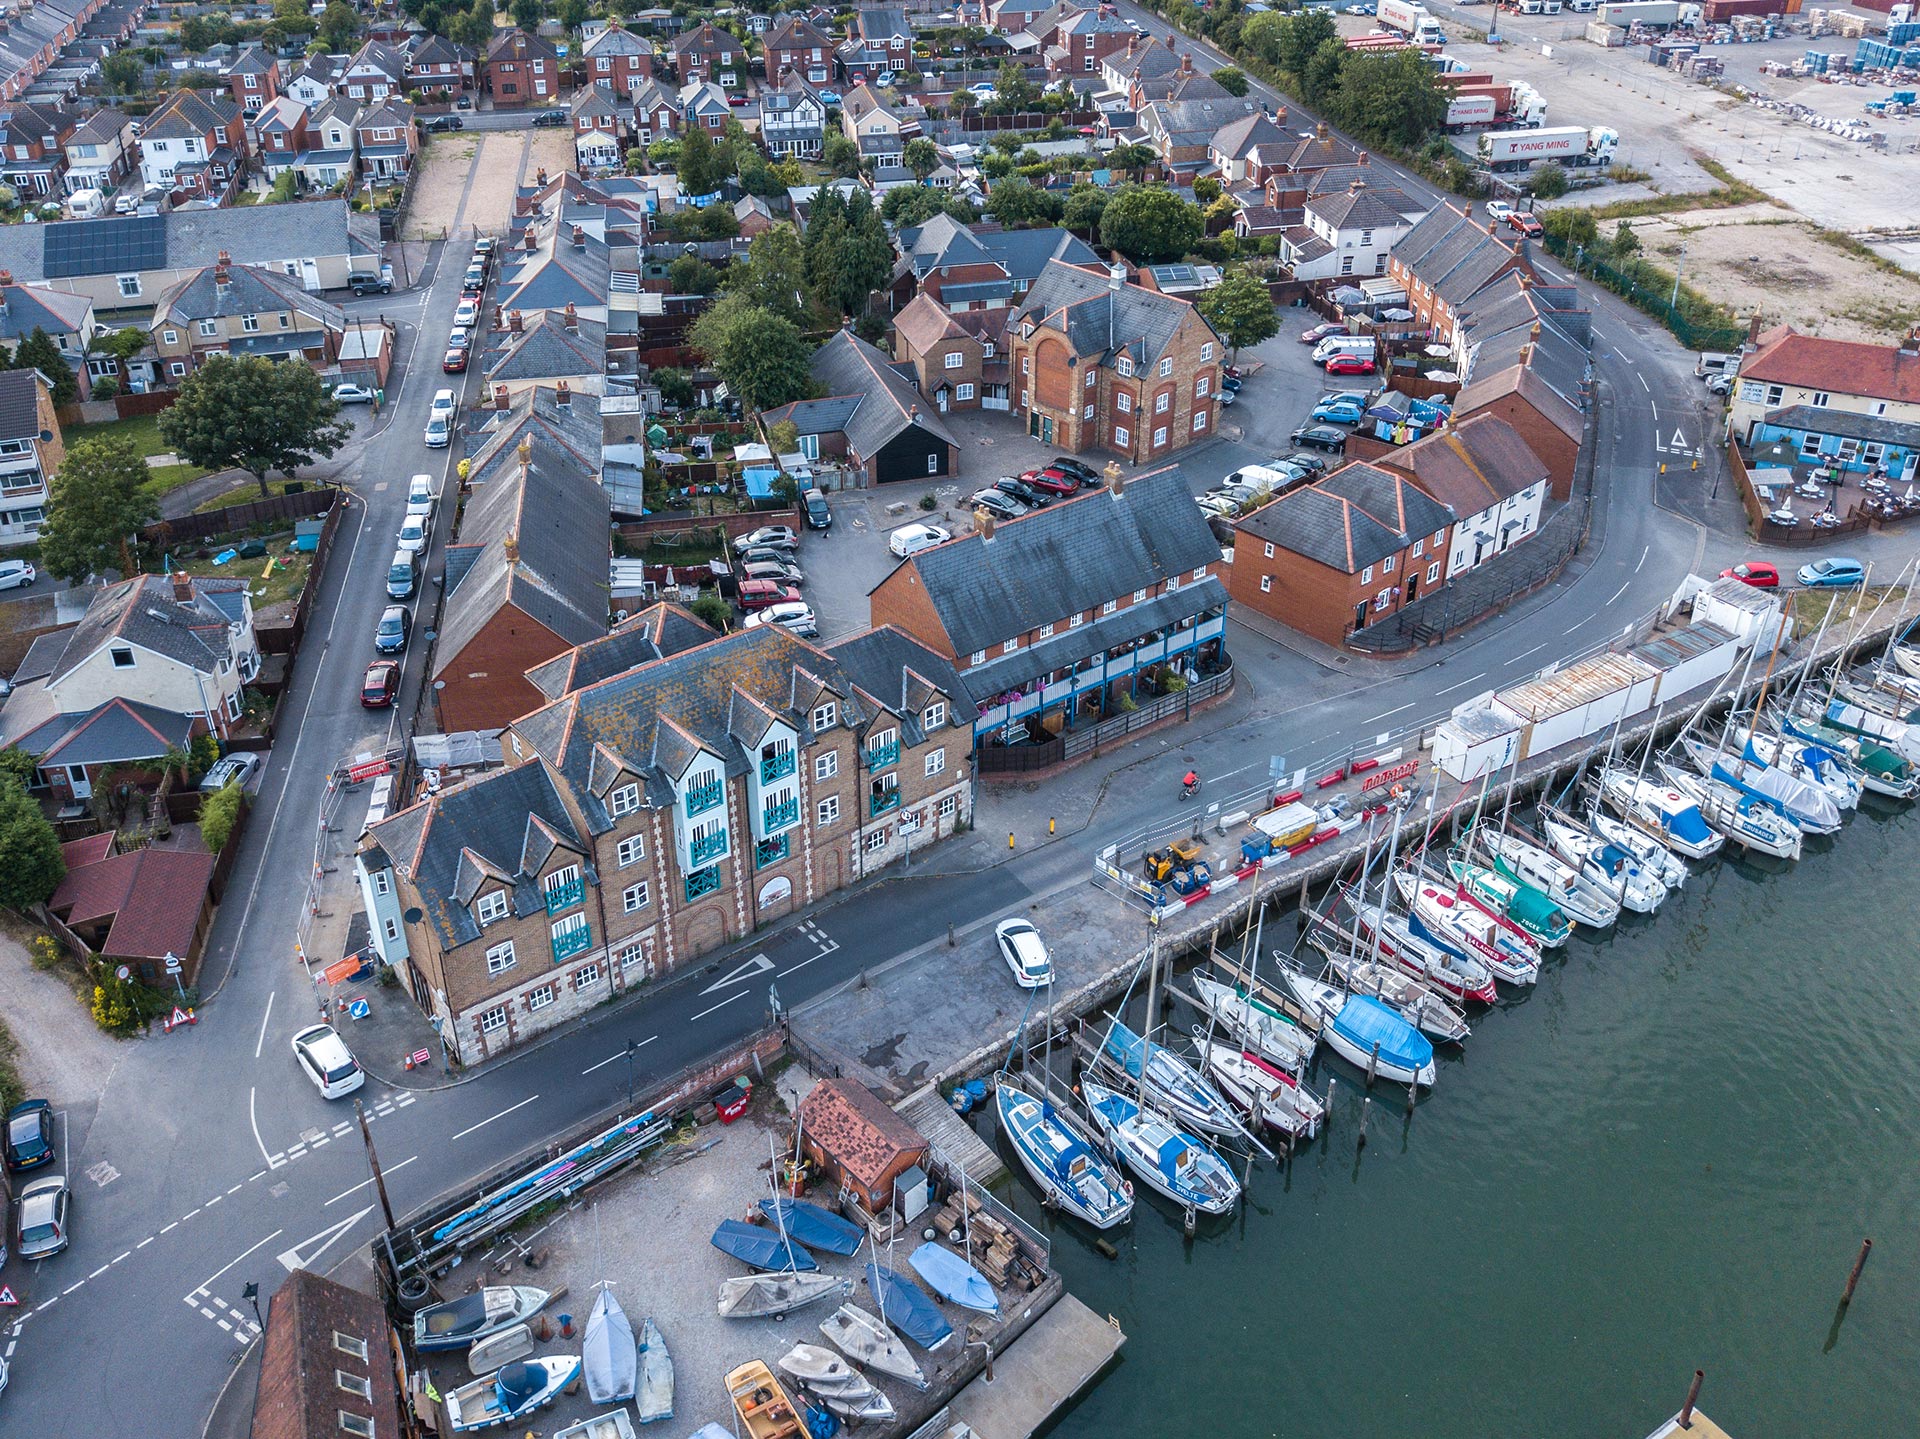 aerial view of historic dockyard and houses